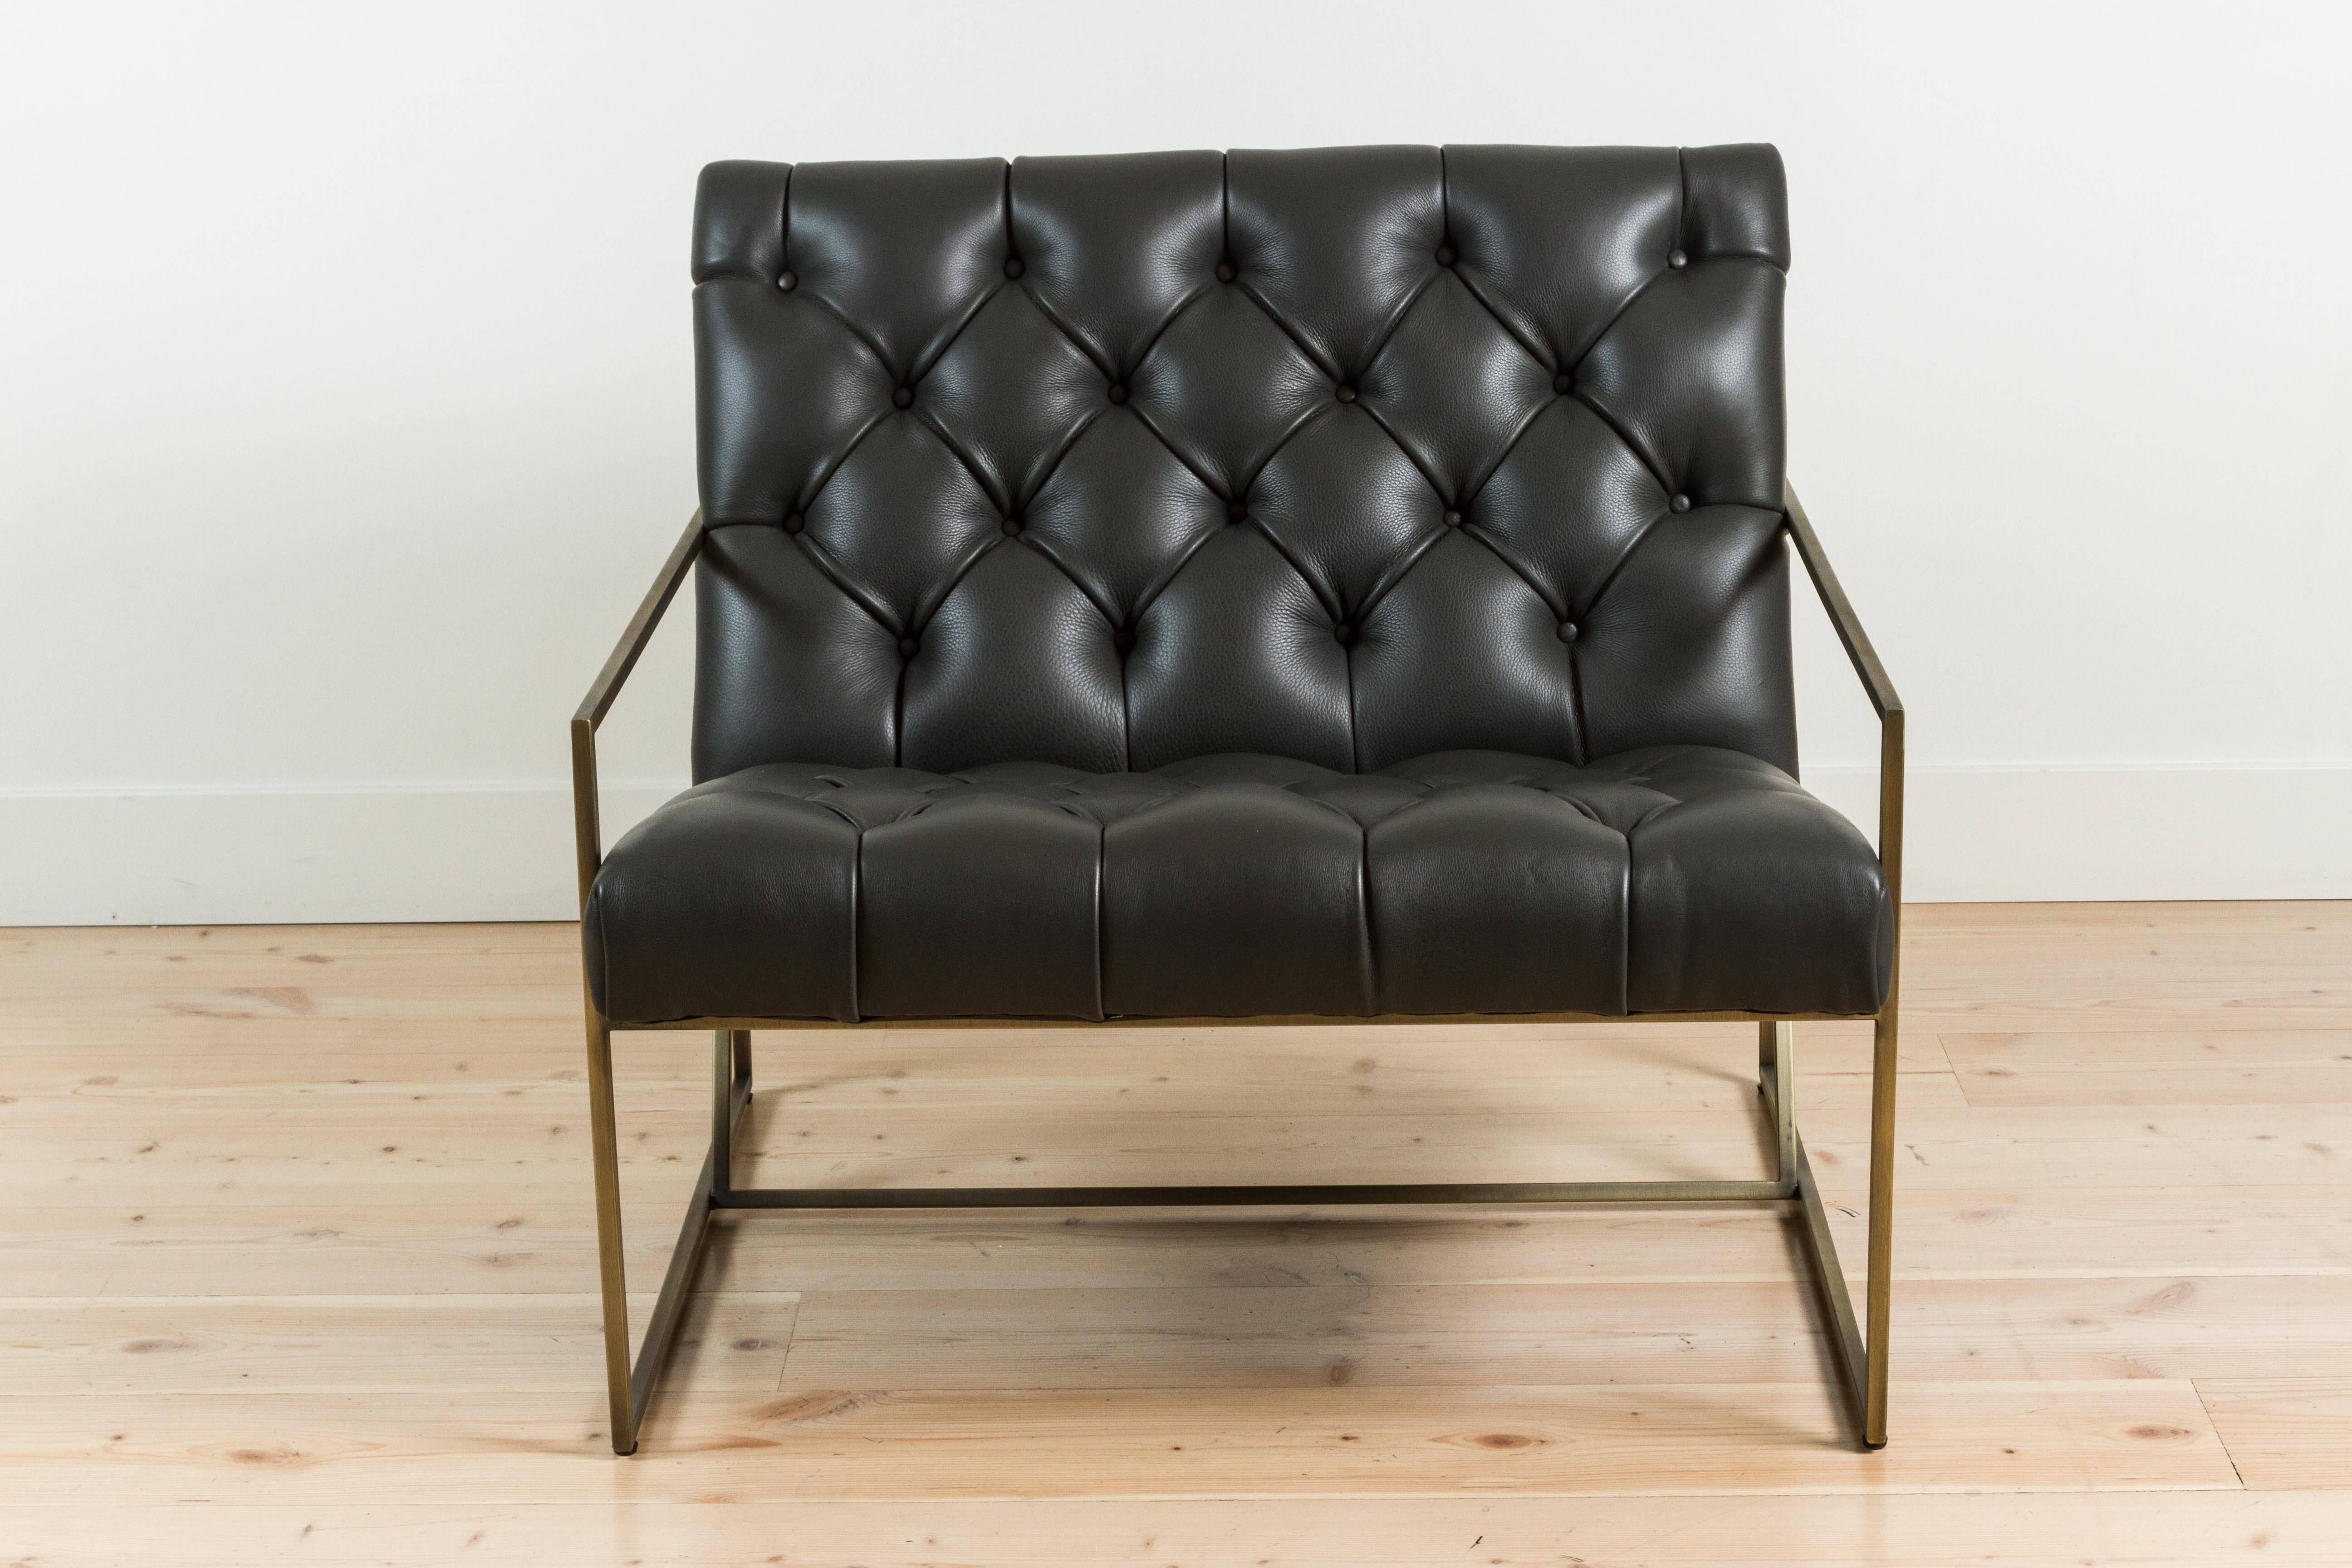 Brass Thin Frame Lounge Chair in Diamond Tufted Charcoal Leather by Lawson-Fenning